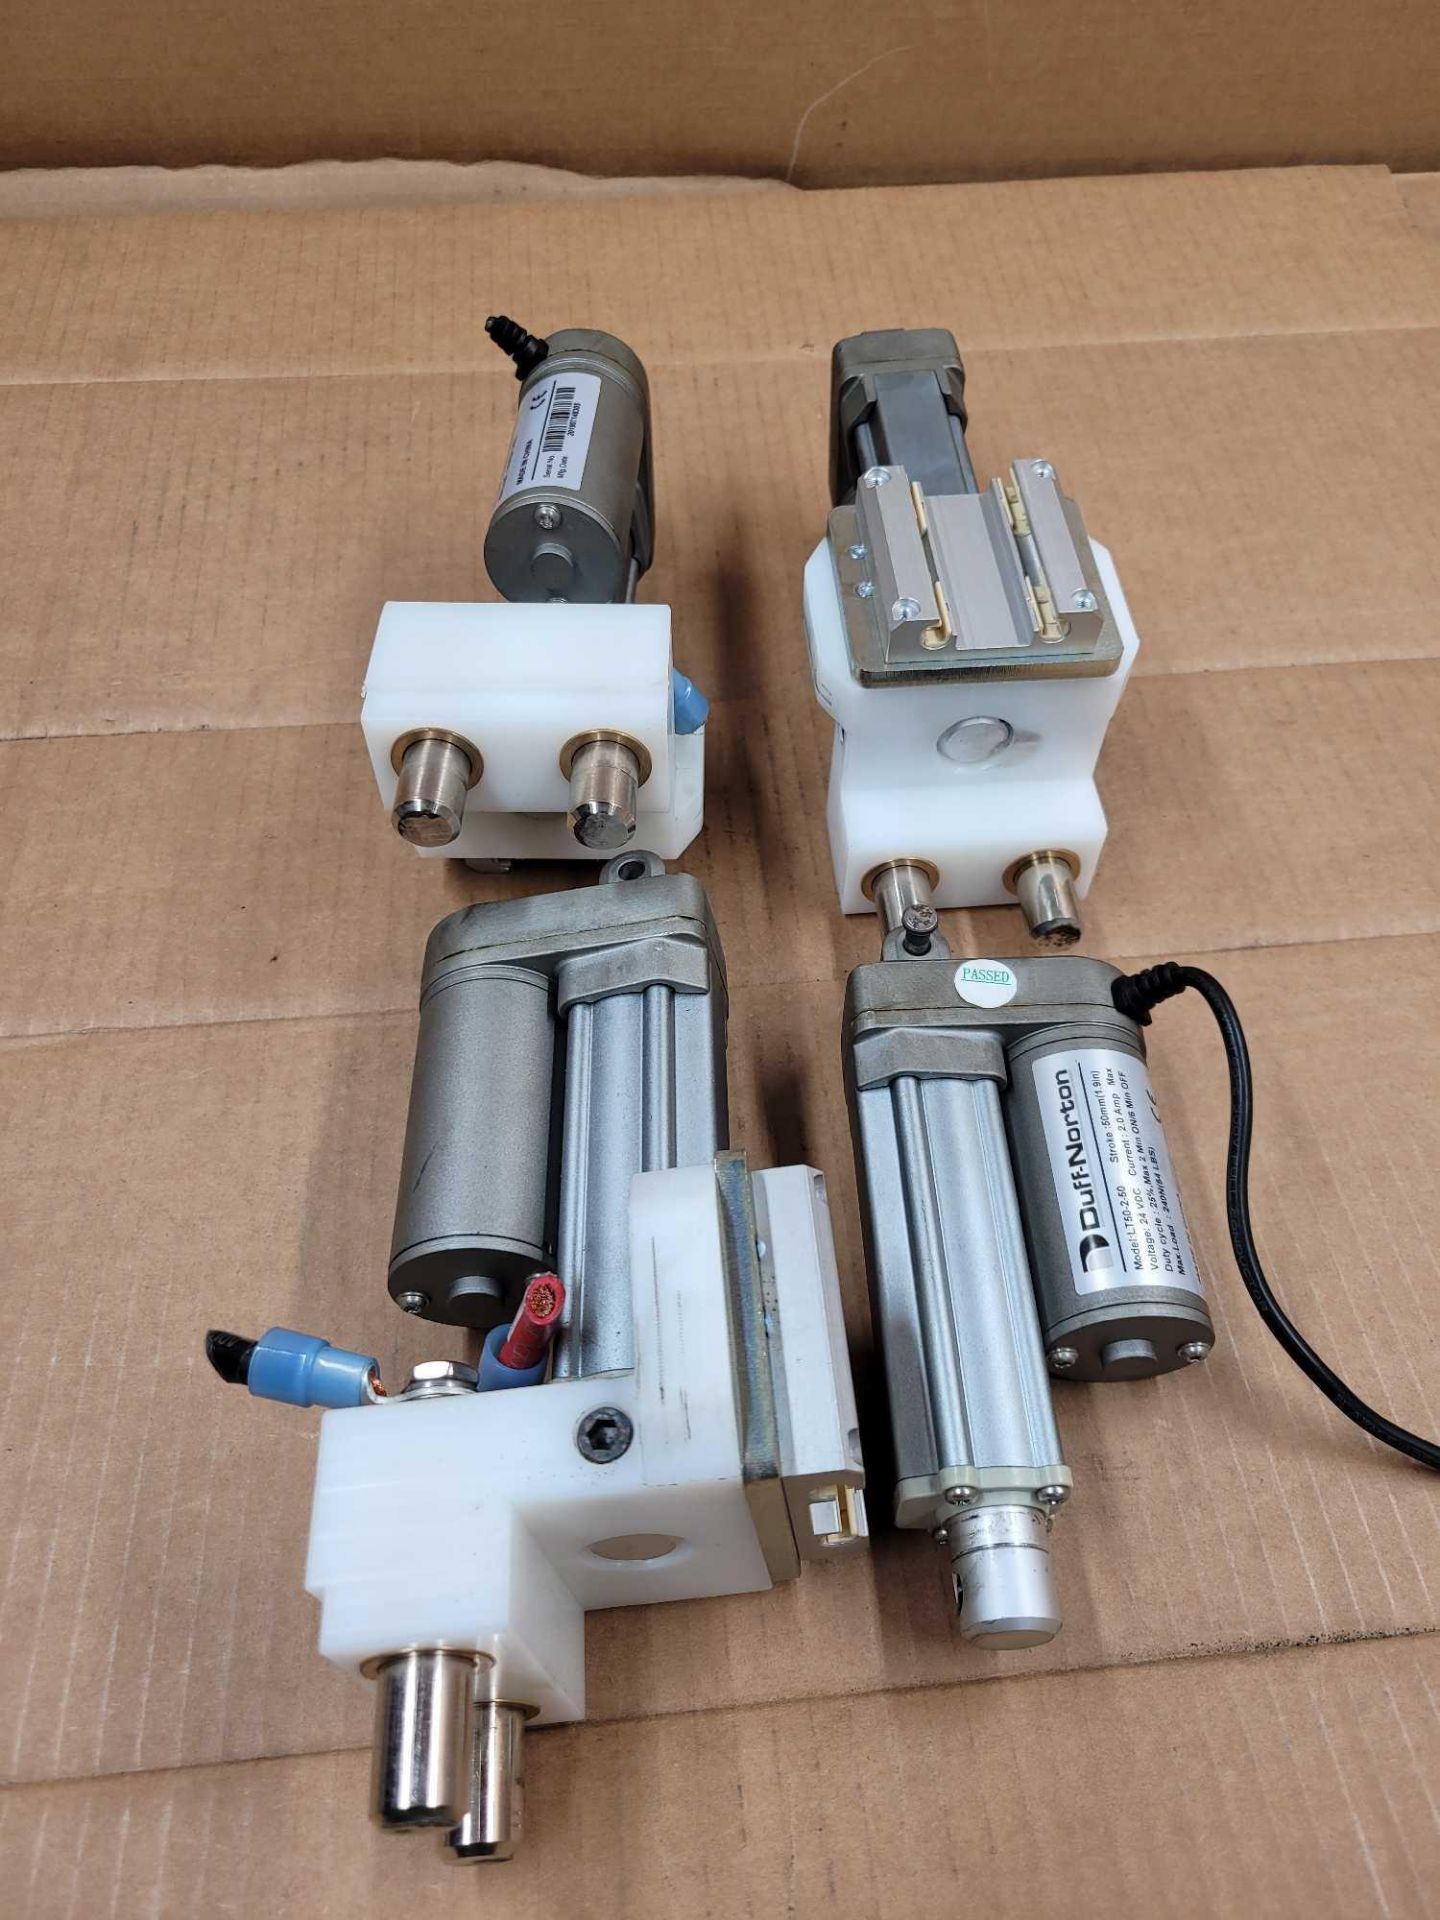 LOT OF 4 DUFF-NORTON LT50-2-50 / Linear Actuator  /  Lot Weight: 11.0 lbs - Image 6 of 6